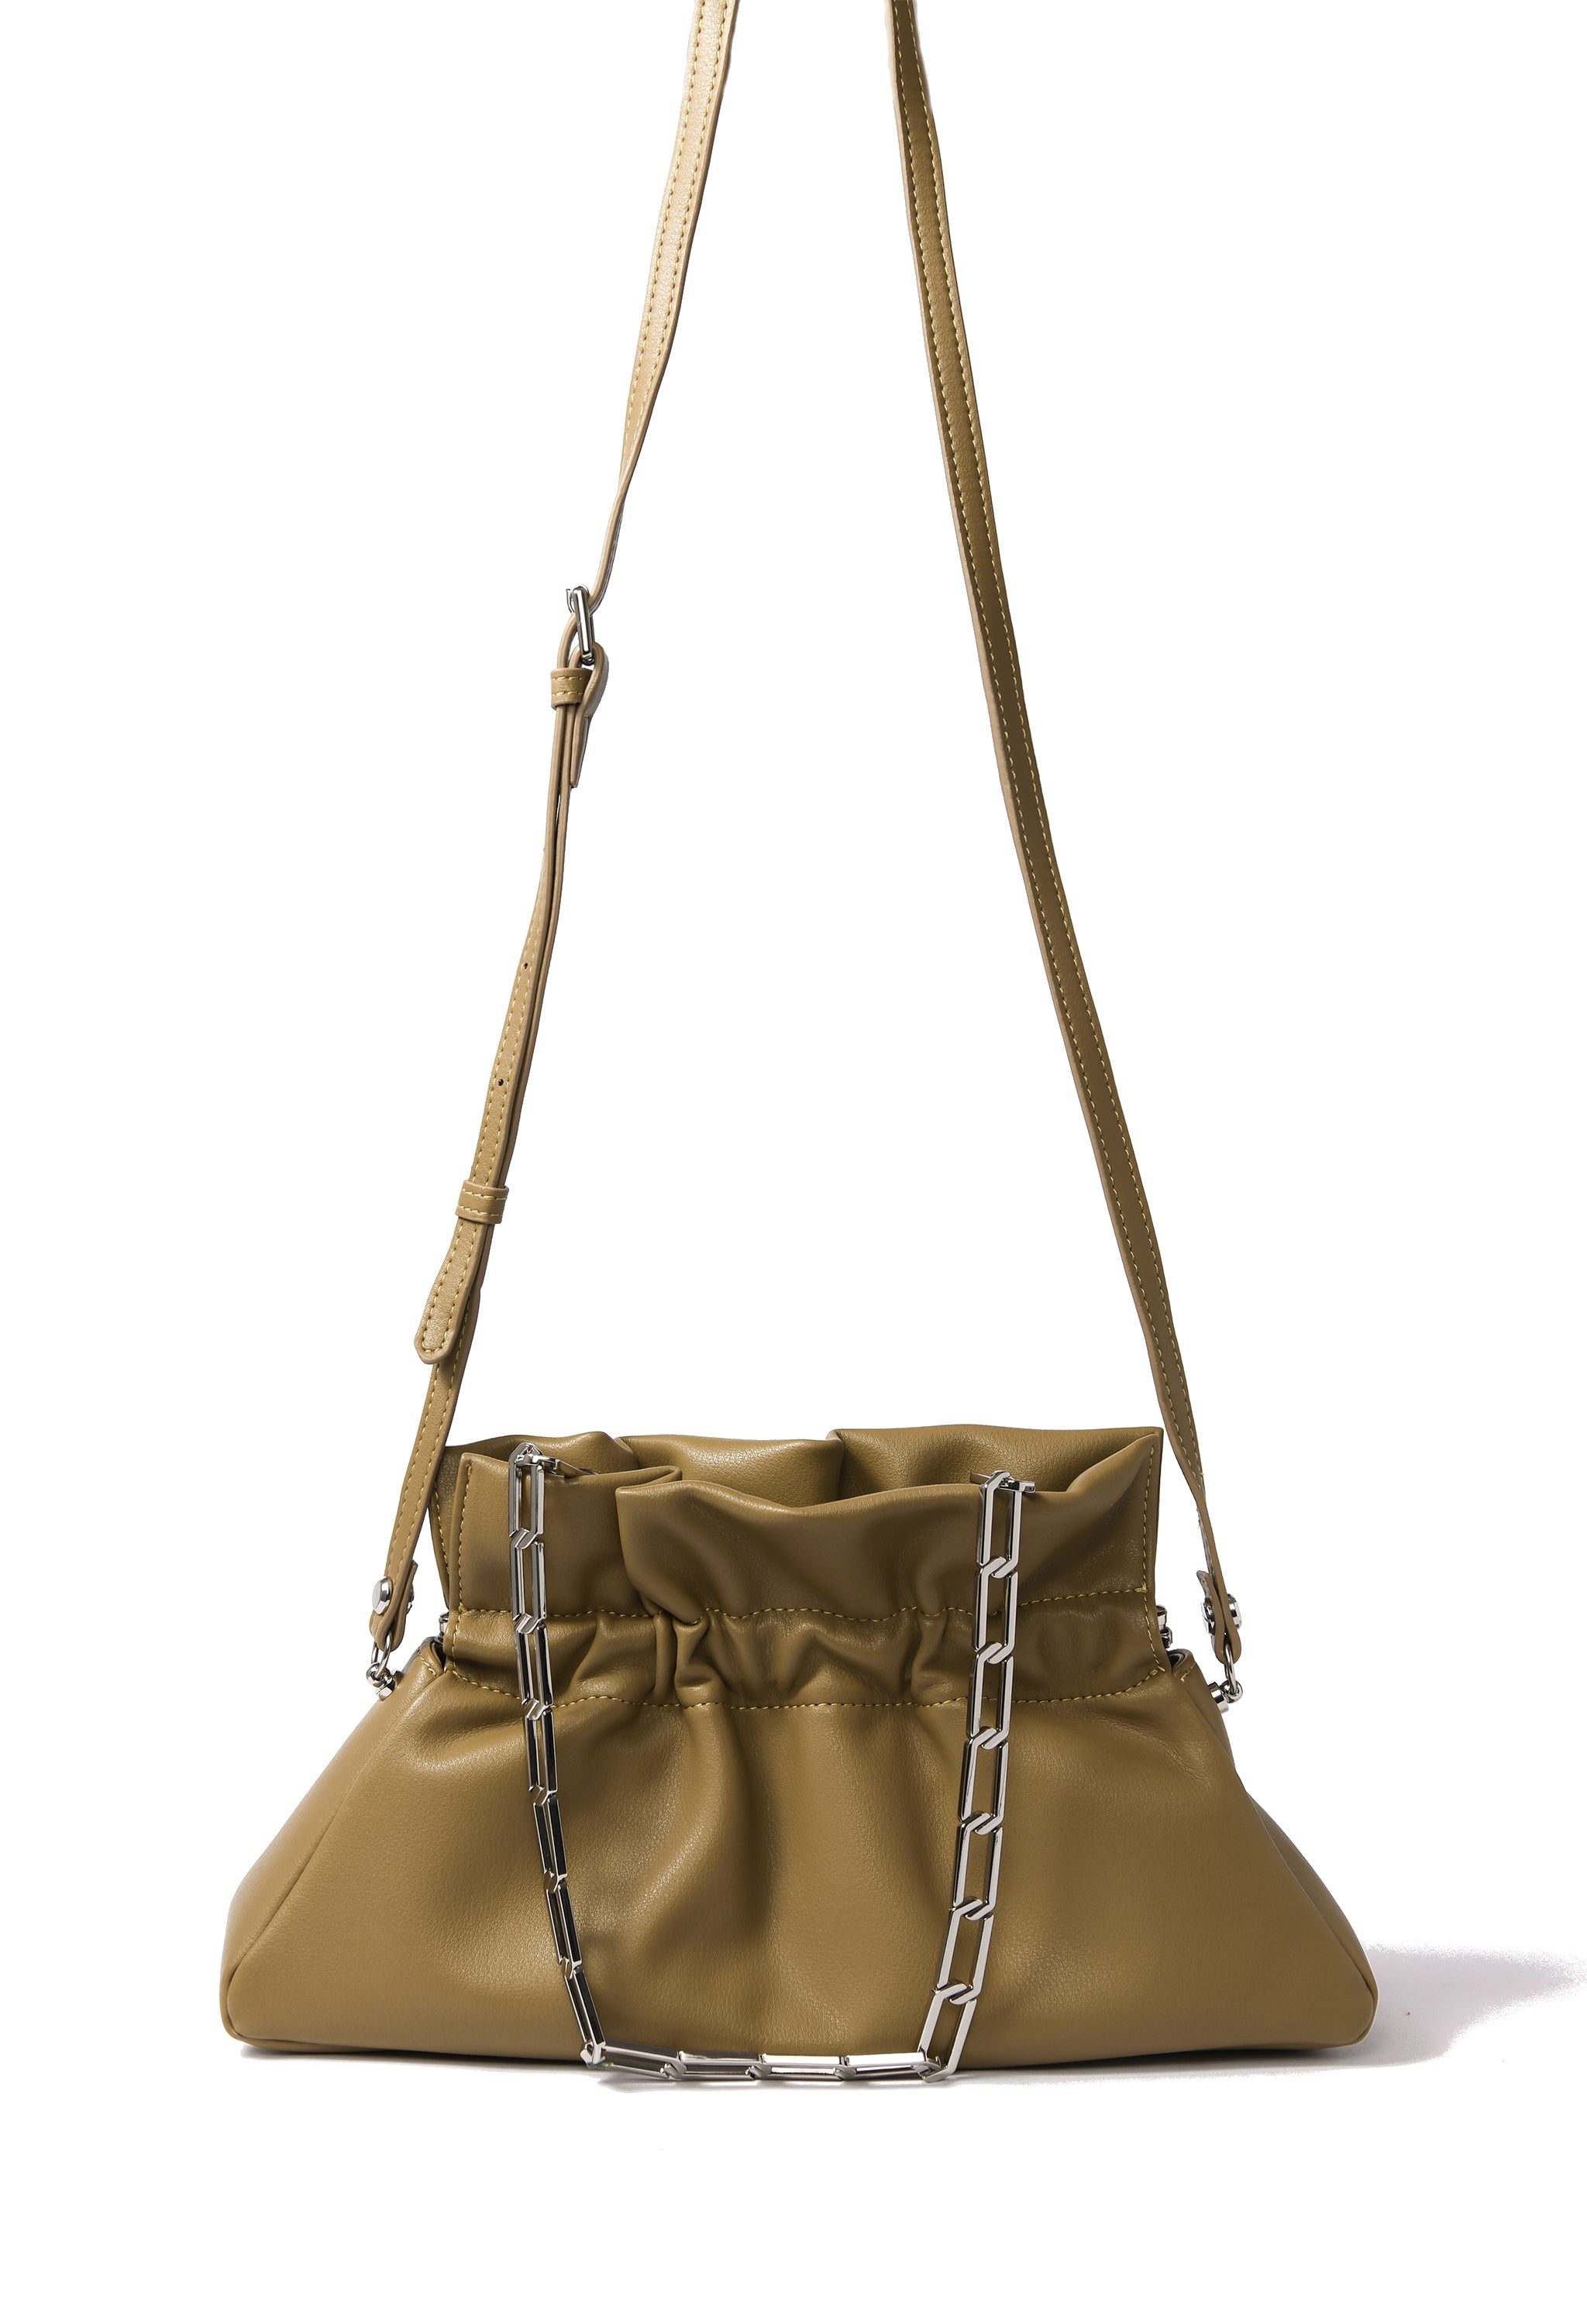 Mila Bag in smooth leather, Mustard Green BOB ORE blue collection on sale 2022